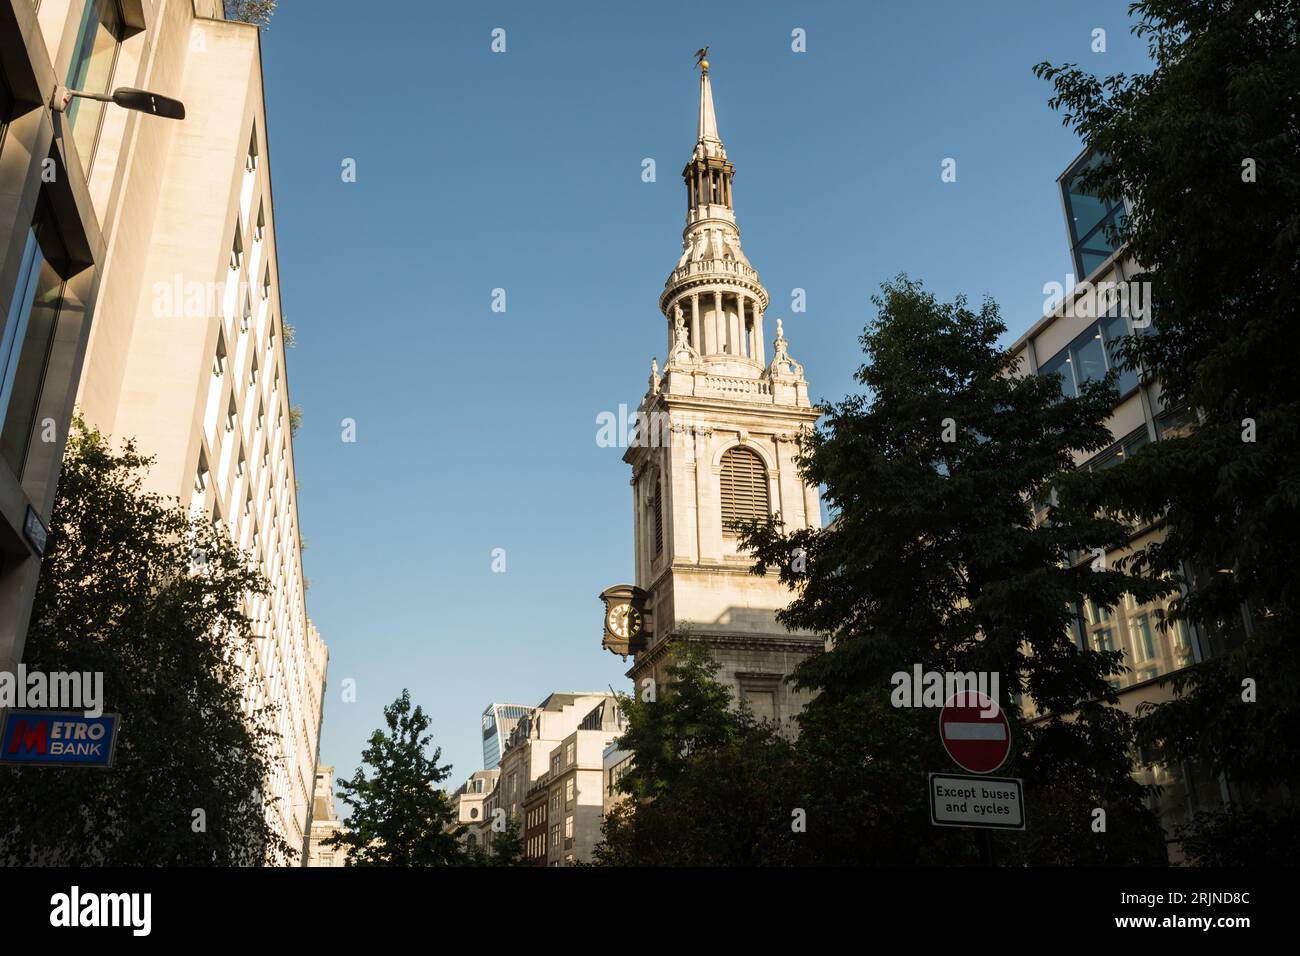 The elegant elegant tower and steeple of Sir Christopher Wren's St Mary-le-Bow Church, Cheapside, London, EC2, England, U.K. Stock Photo